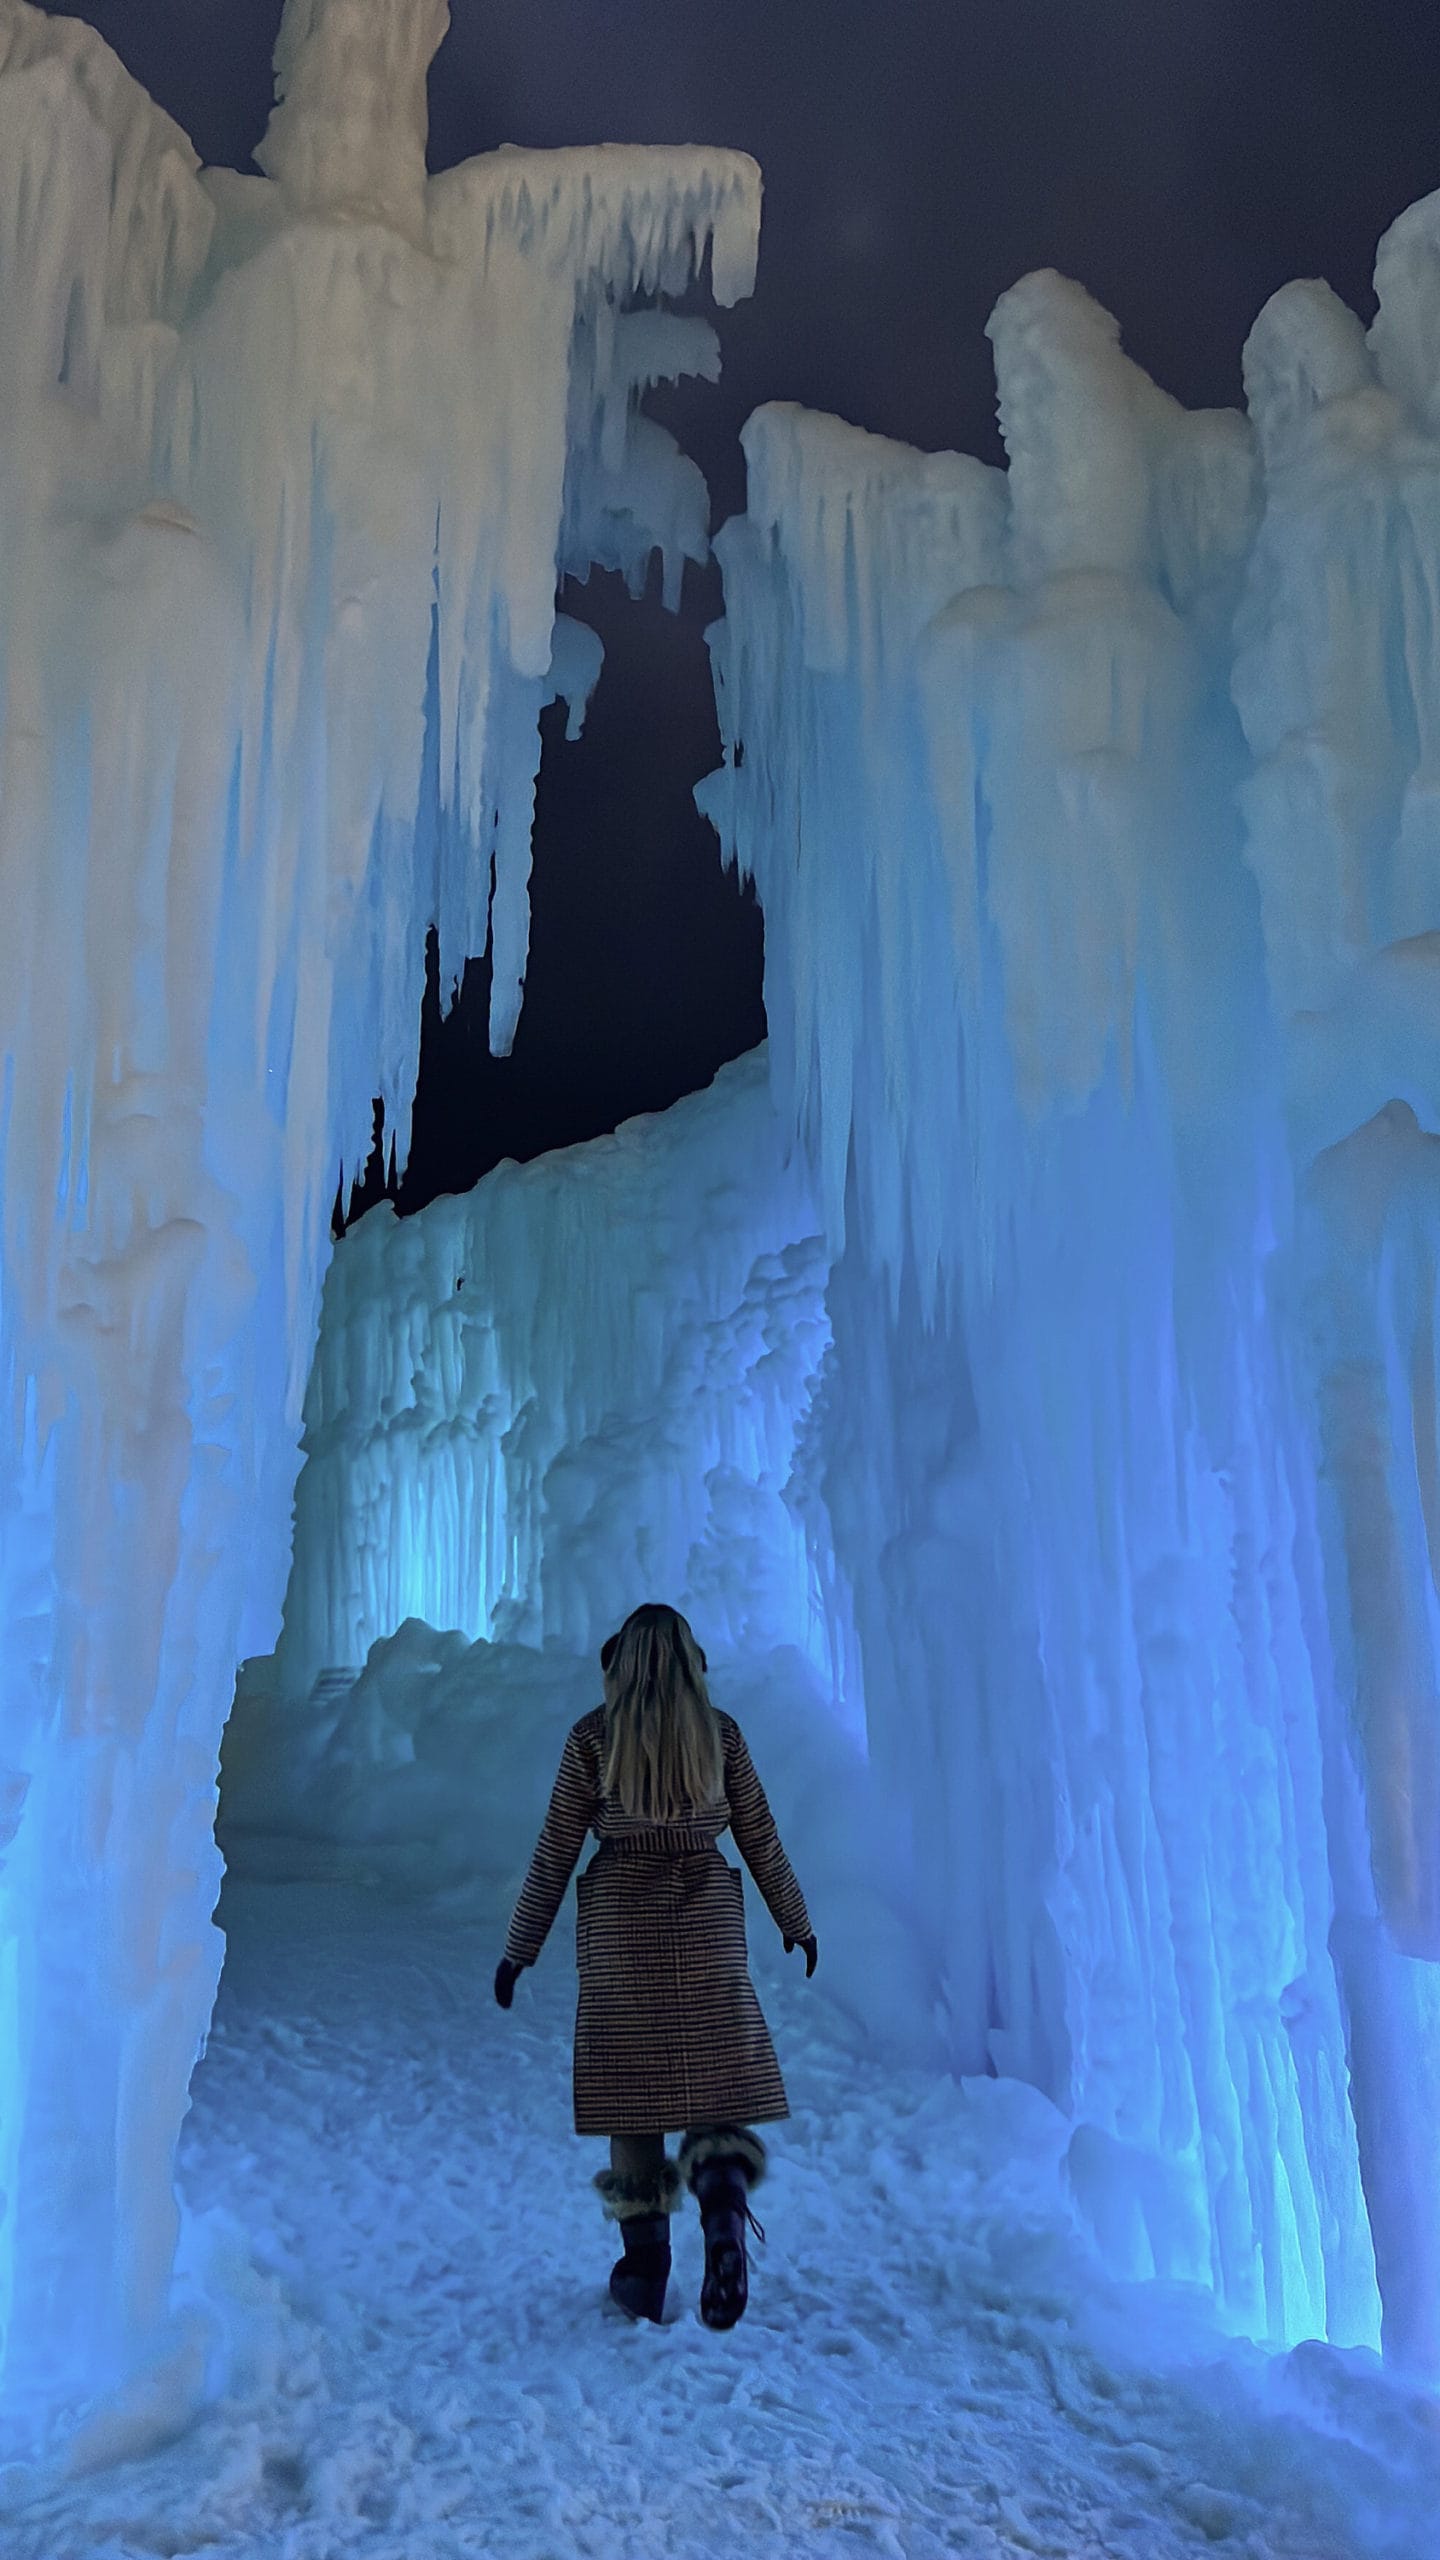 visiting ice castles